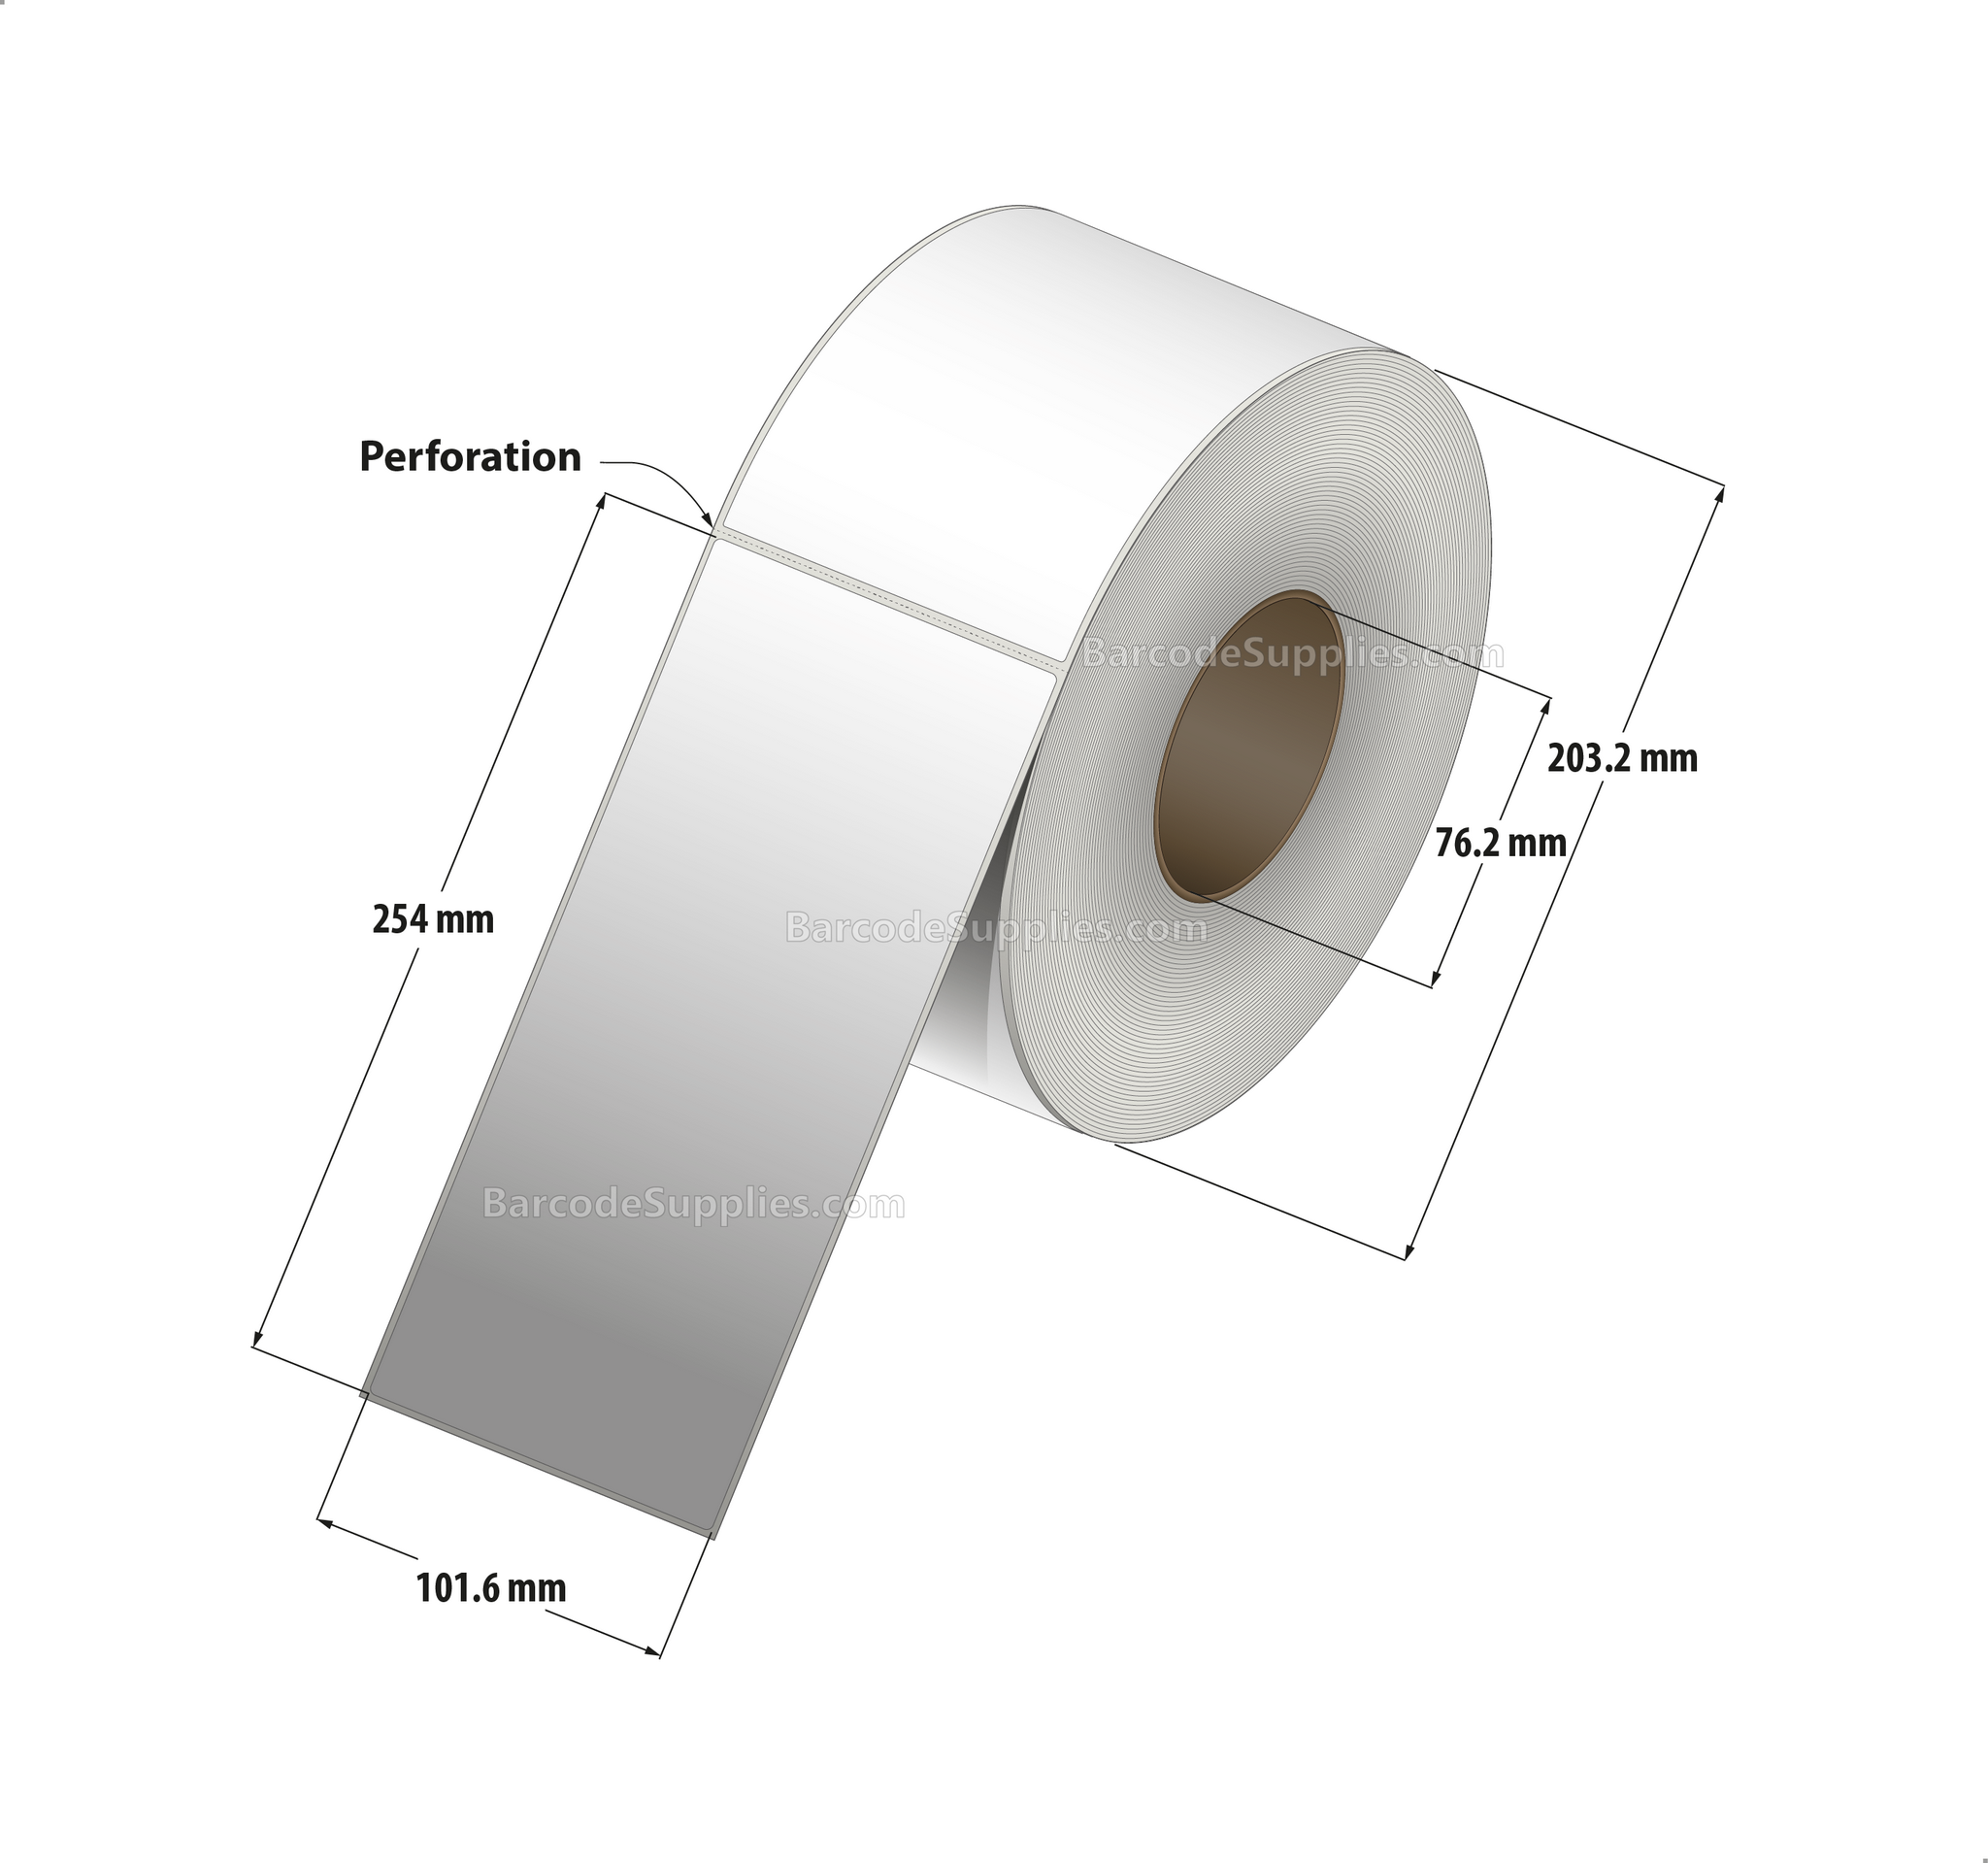 4 x 10 Thermal Transfer White Labels With Rubber Adhesive - Perforated - 600 Labels Per Roll - Carton Of 4 Rolls - 2400 Labels Total - MPN: CTT4001000-3P